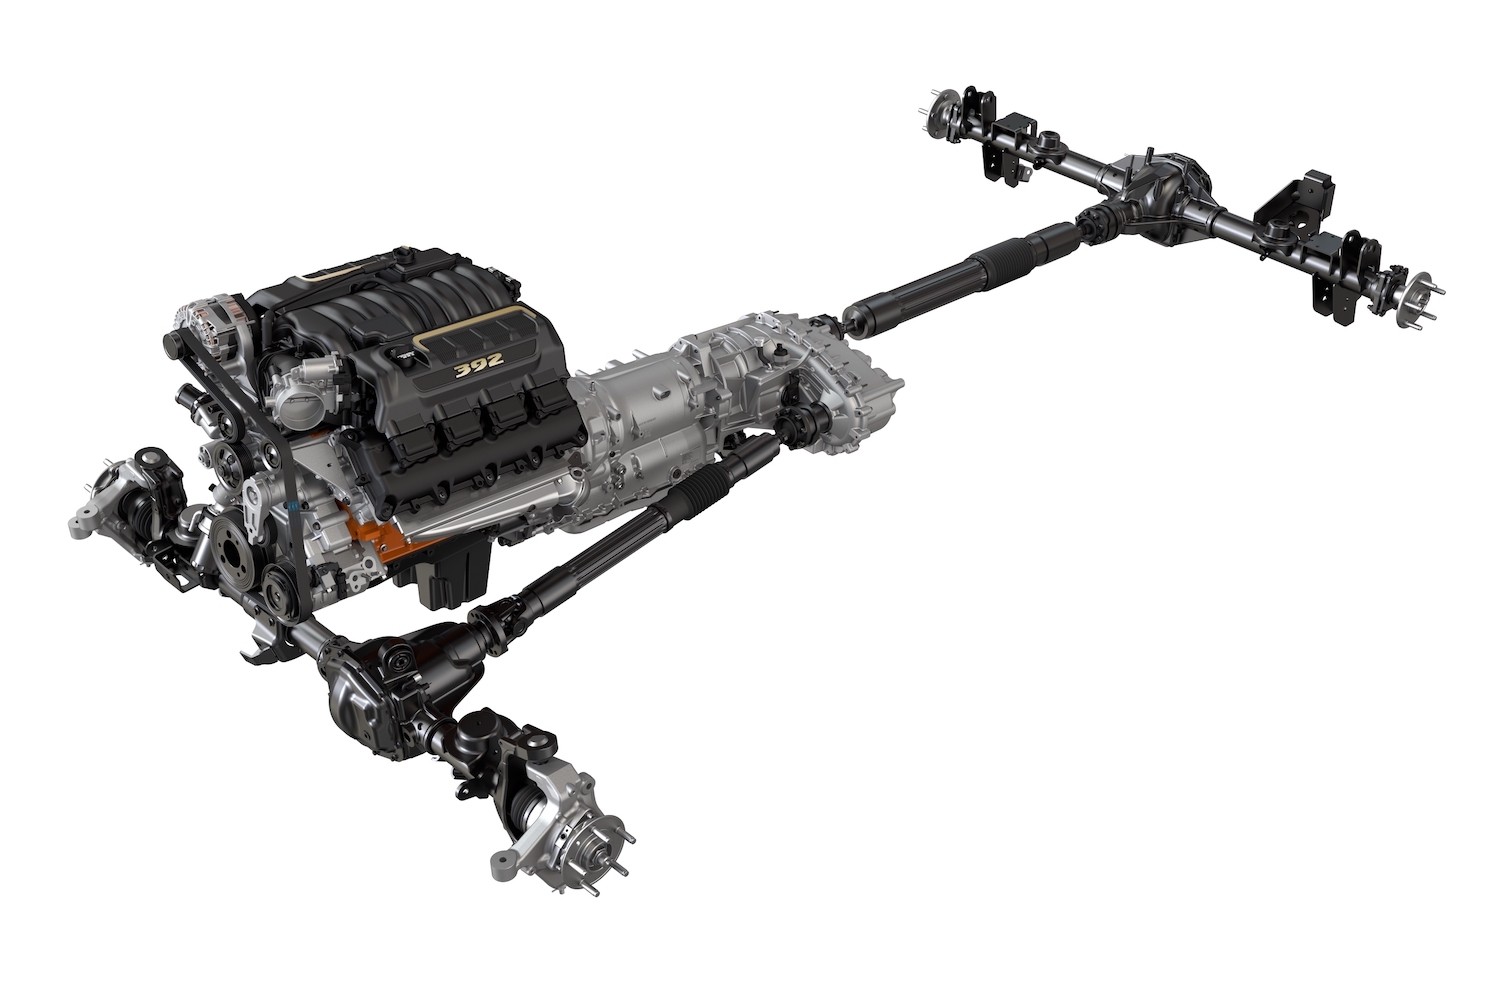 The isolated Dodge/Ram engine and drivetrain of the HEMI V8-powered Jeep Wrangler 392, set against a white backdrop.